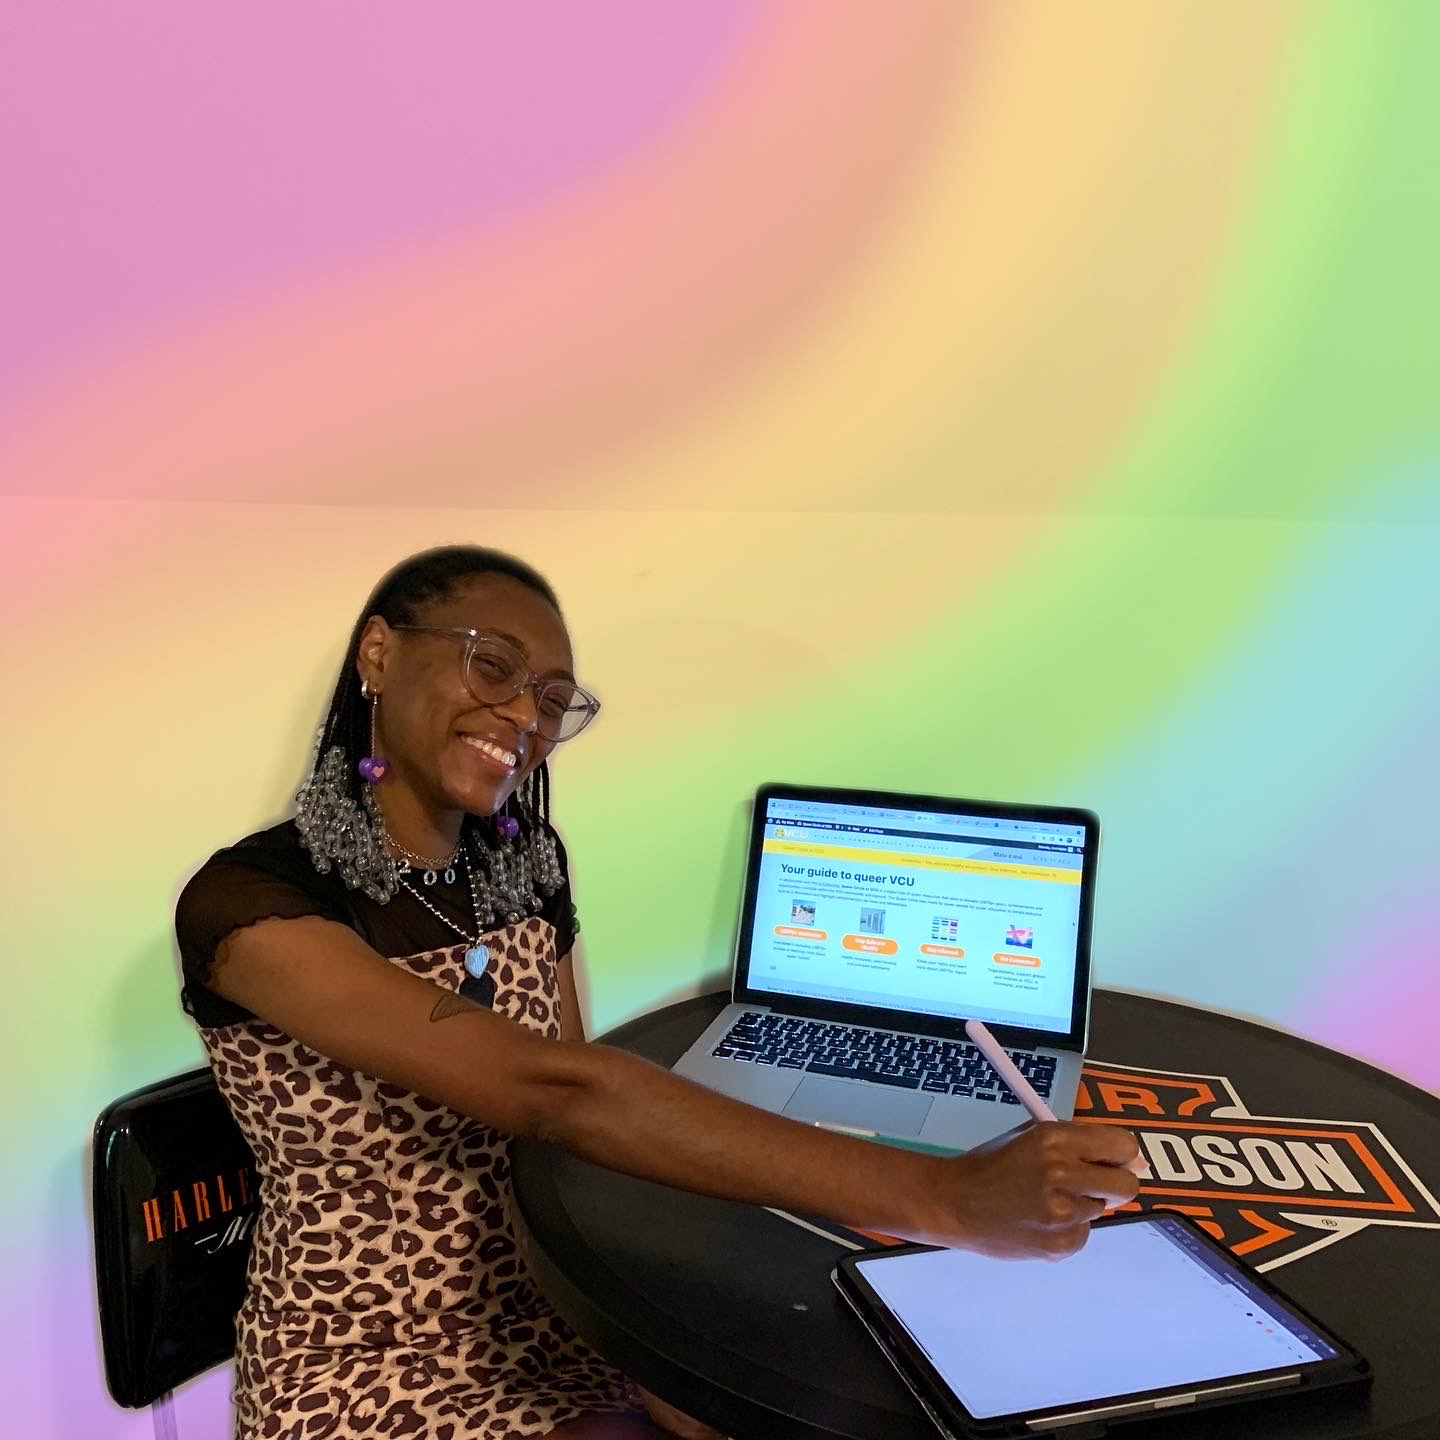 Murray smiles in front of a laptop screen displaying Queer Circle at VCU. The background has been edited with pastel rainbow colors.